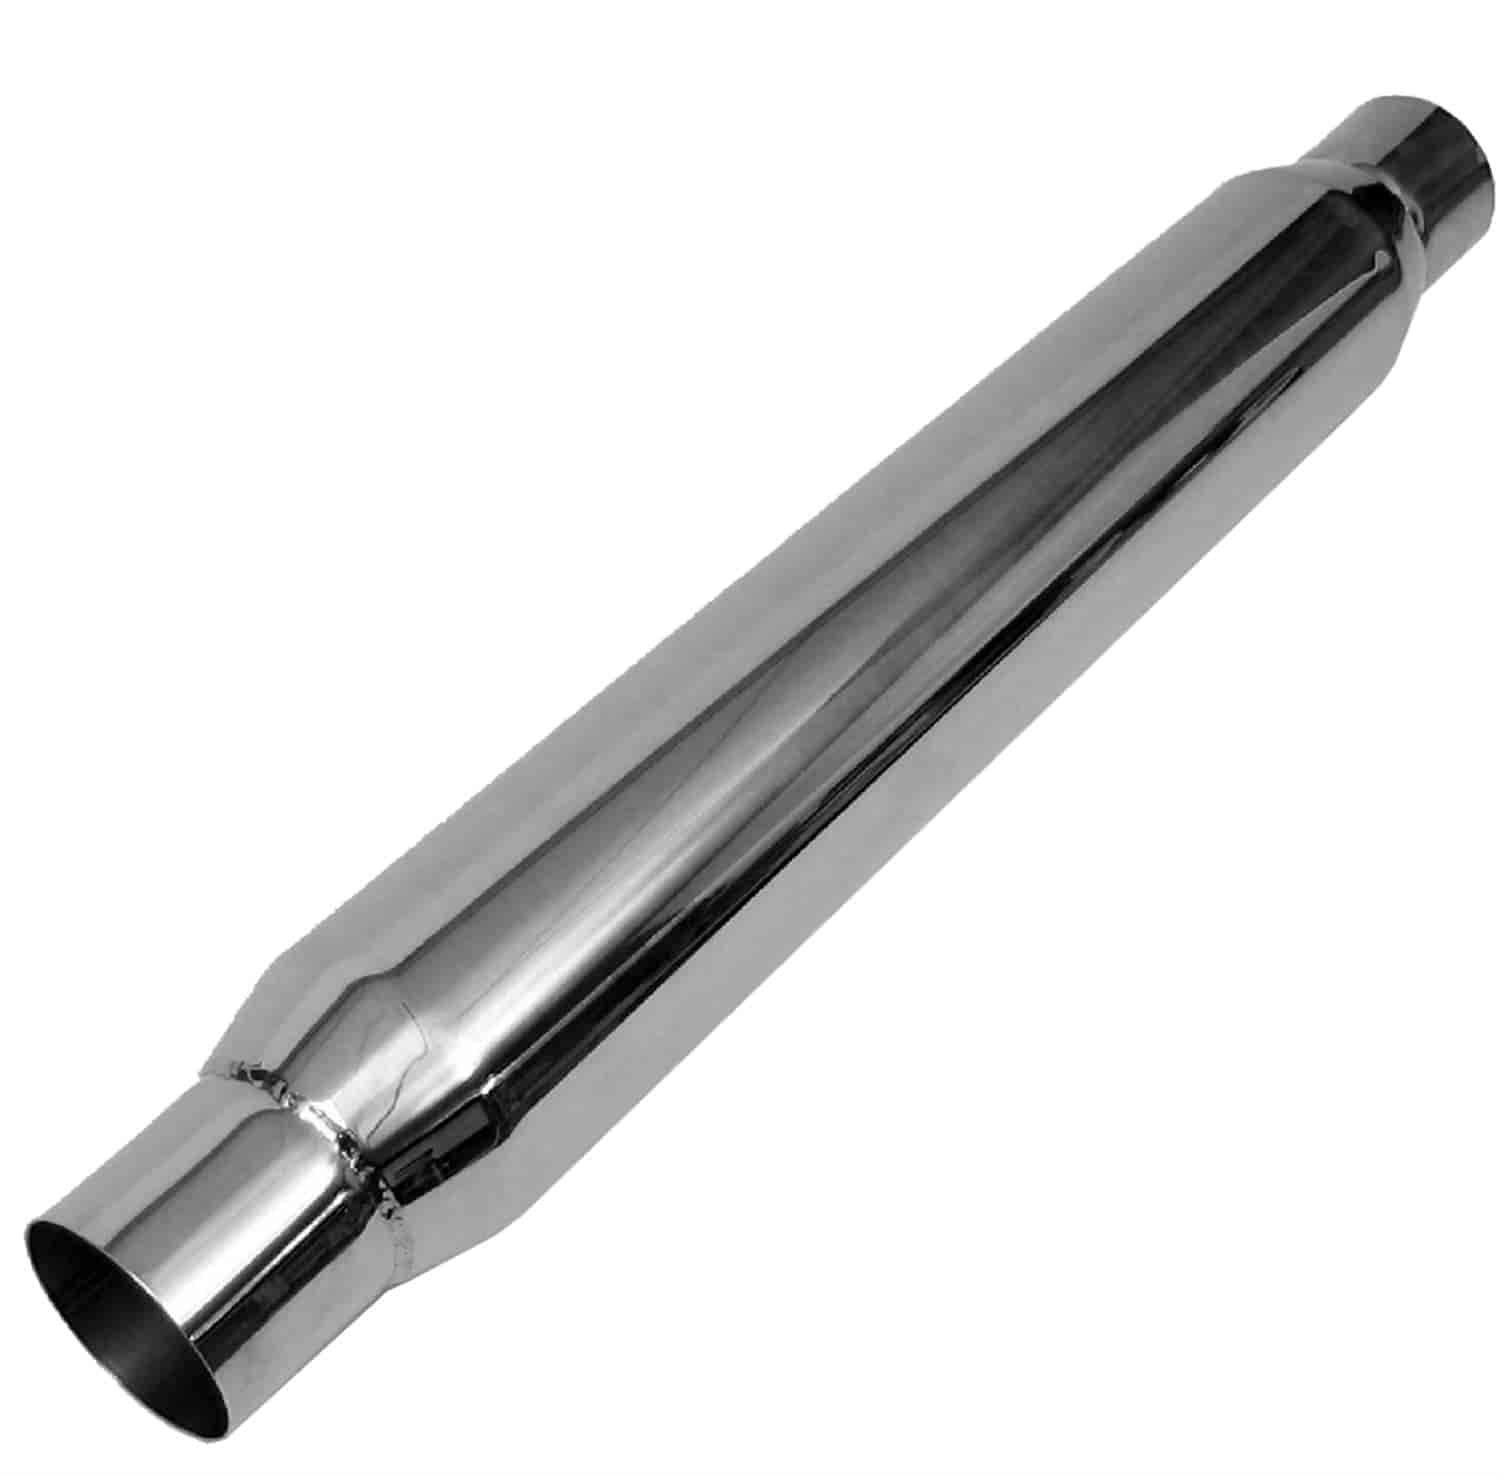 Stainless Glasspack Muffler In/Out: 3"